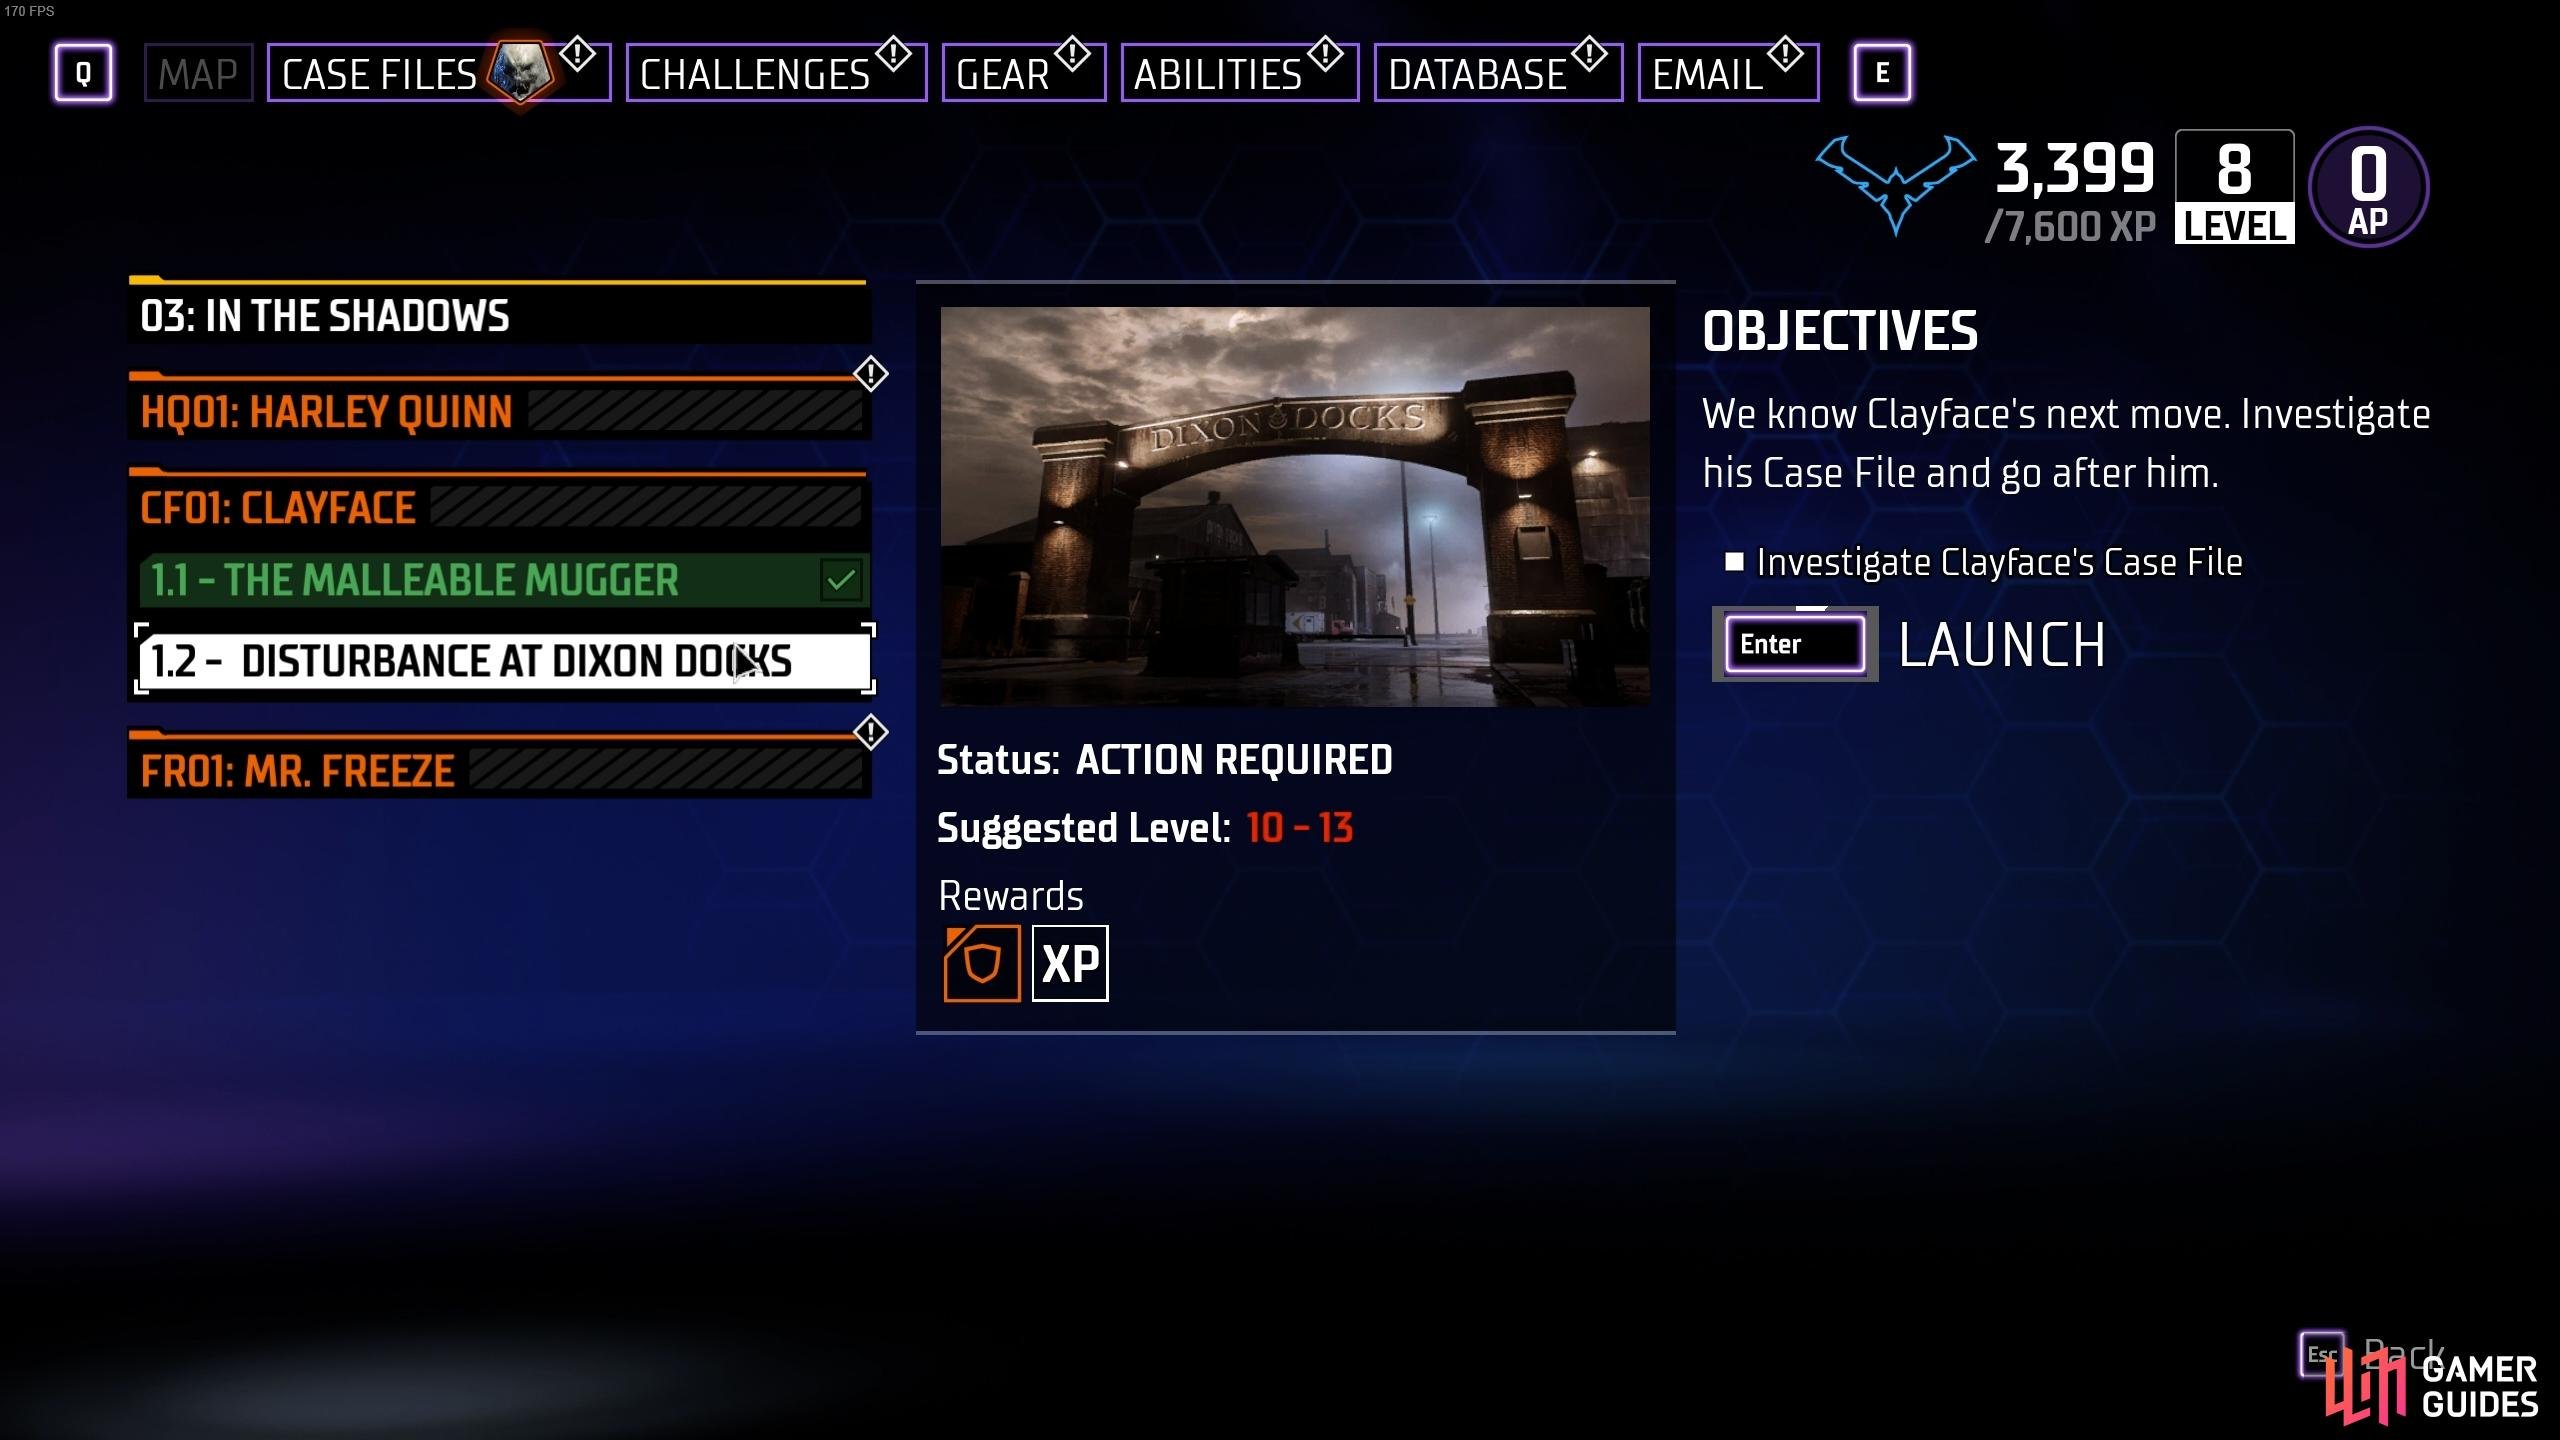 You can start the next part of the Clayface Case from the Case Files menu.